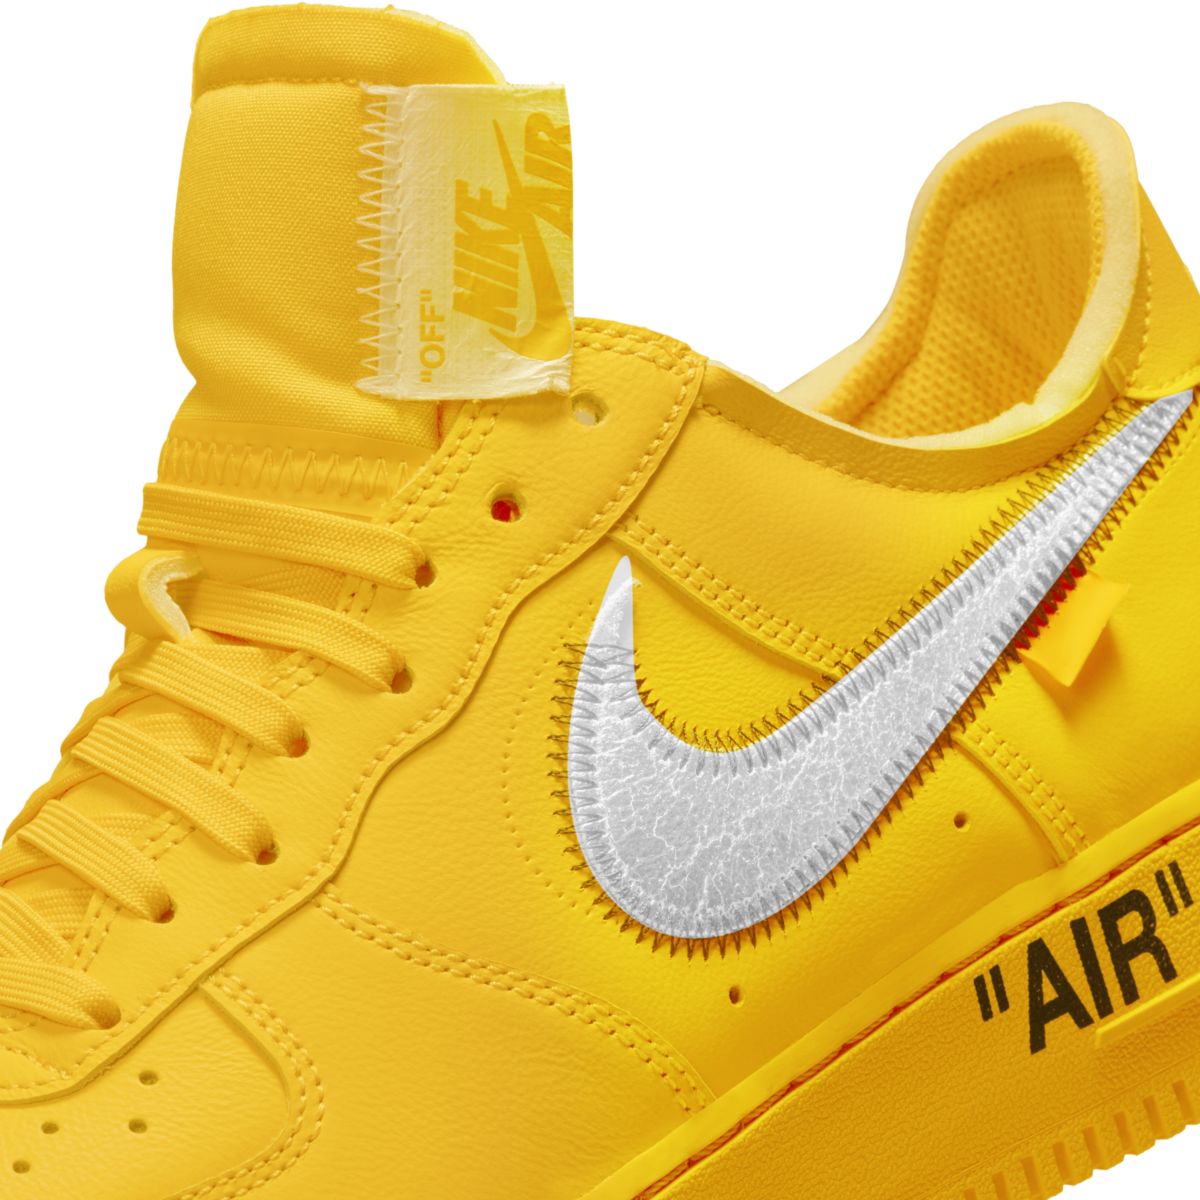 Off-White x Nike Air Force 1 Low University Gold DD1876-700 10